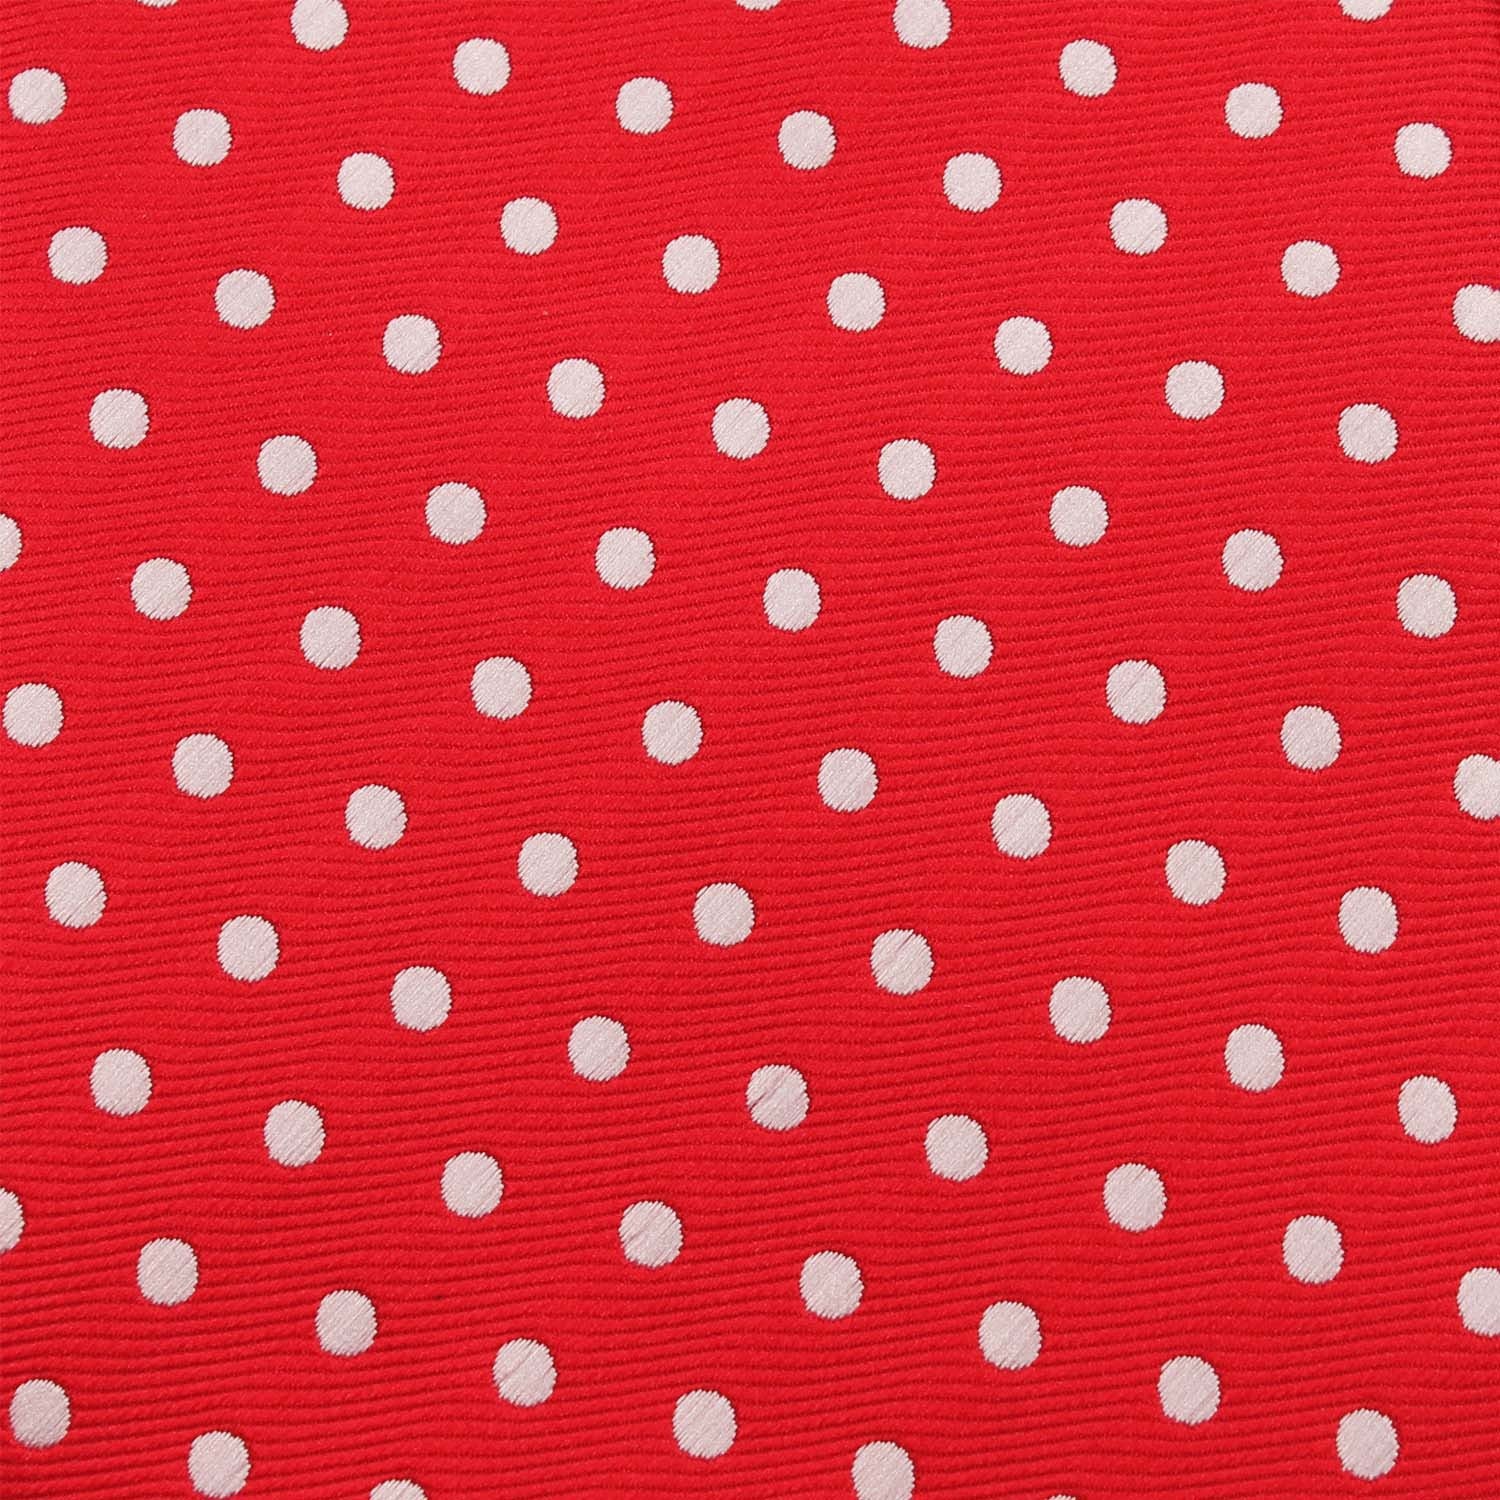 Royal Red Polka Dots Fabric Self Tie Bow Tie X726